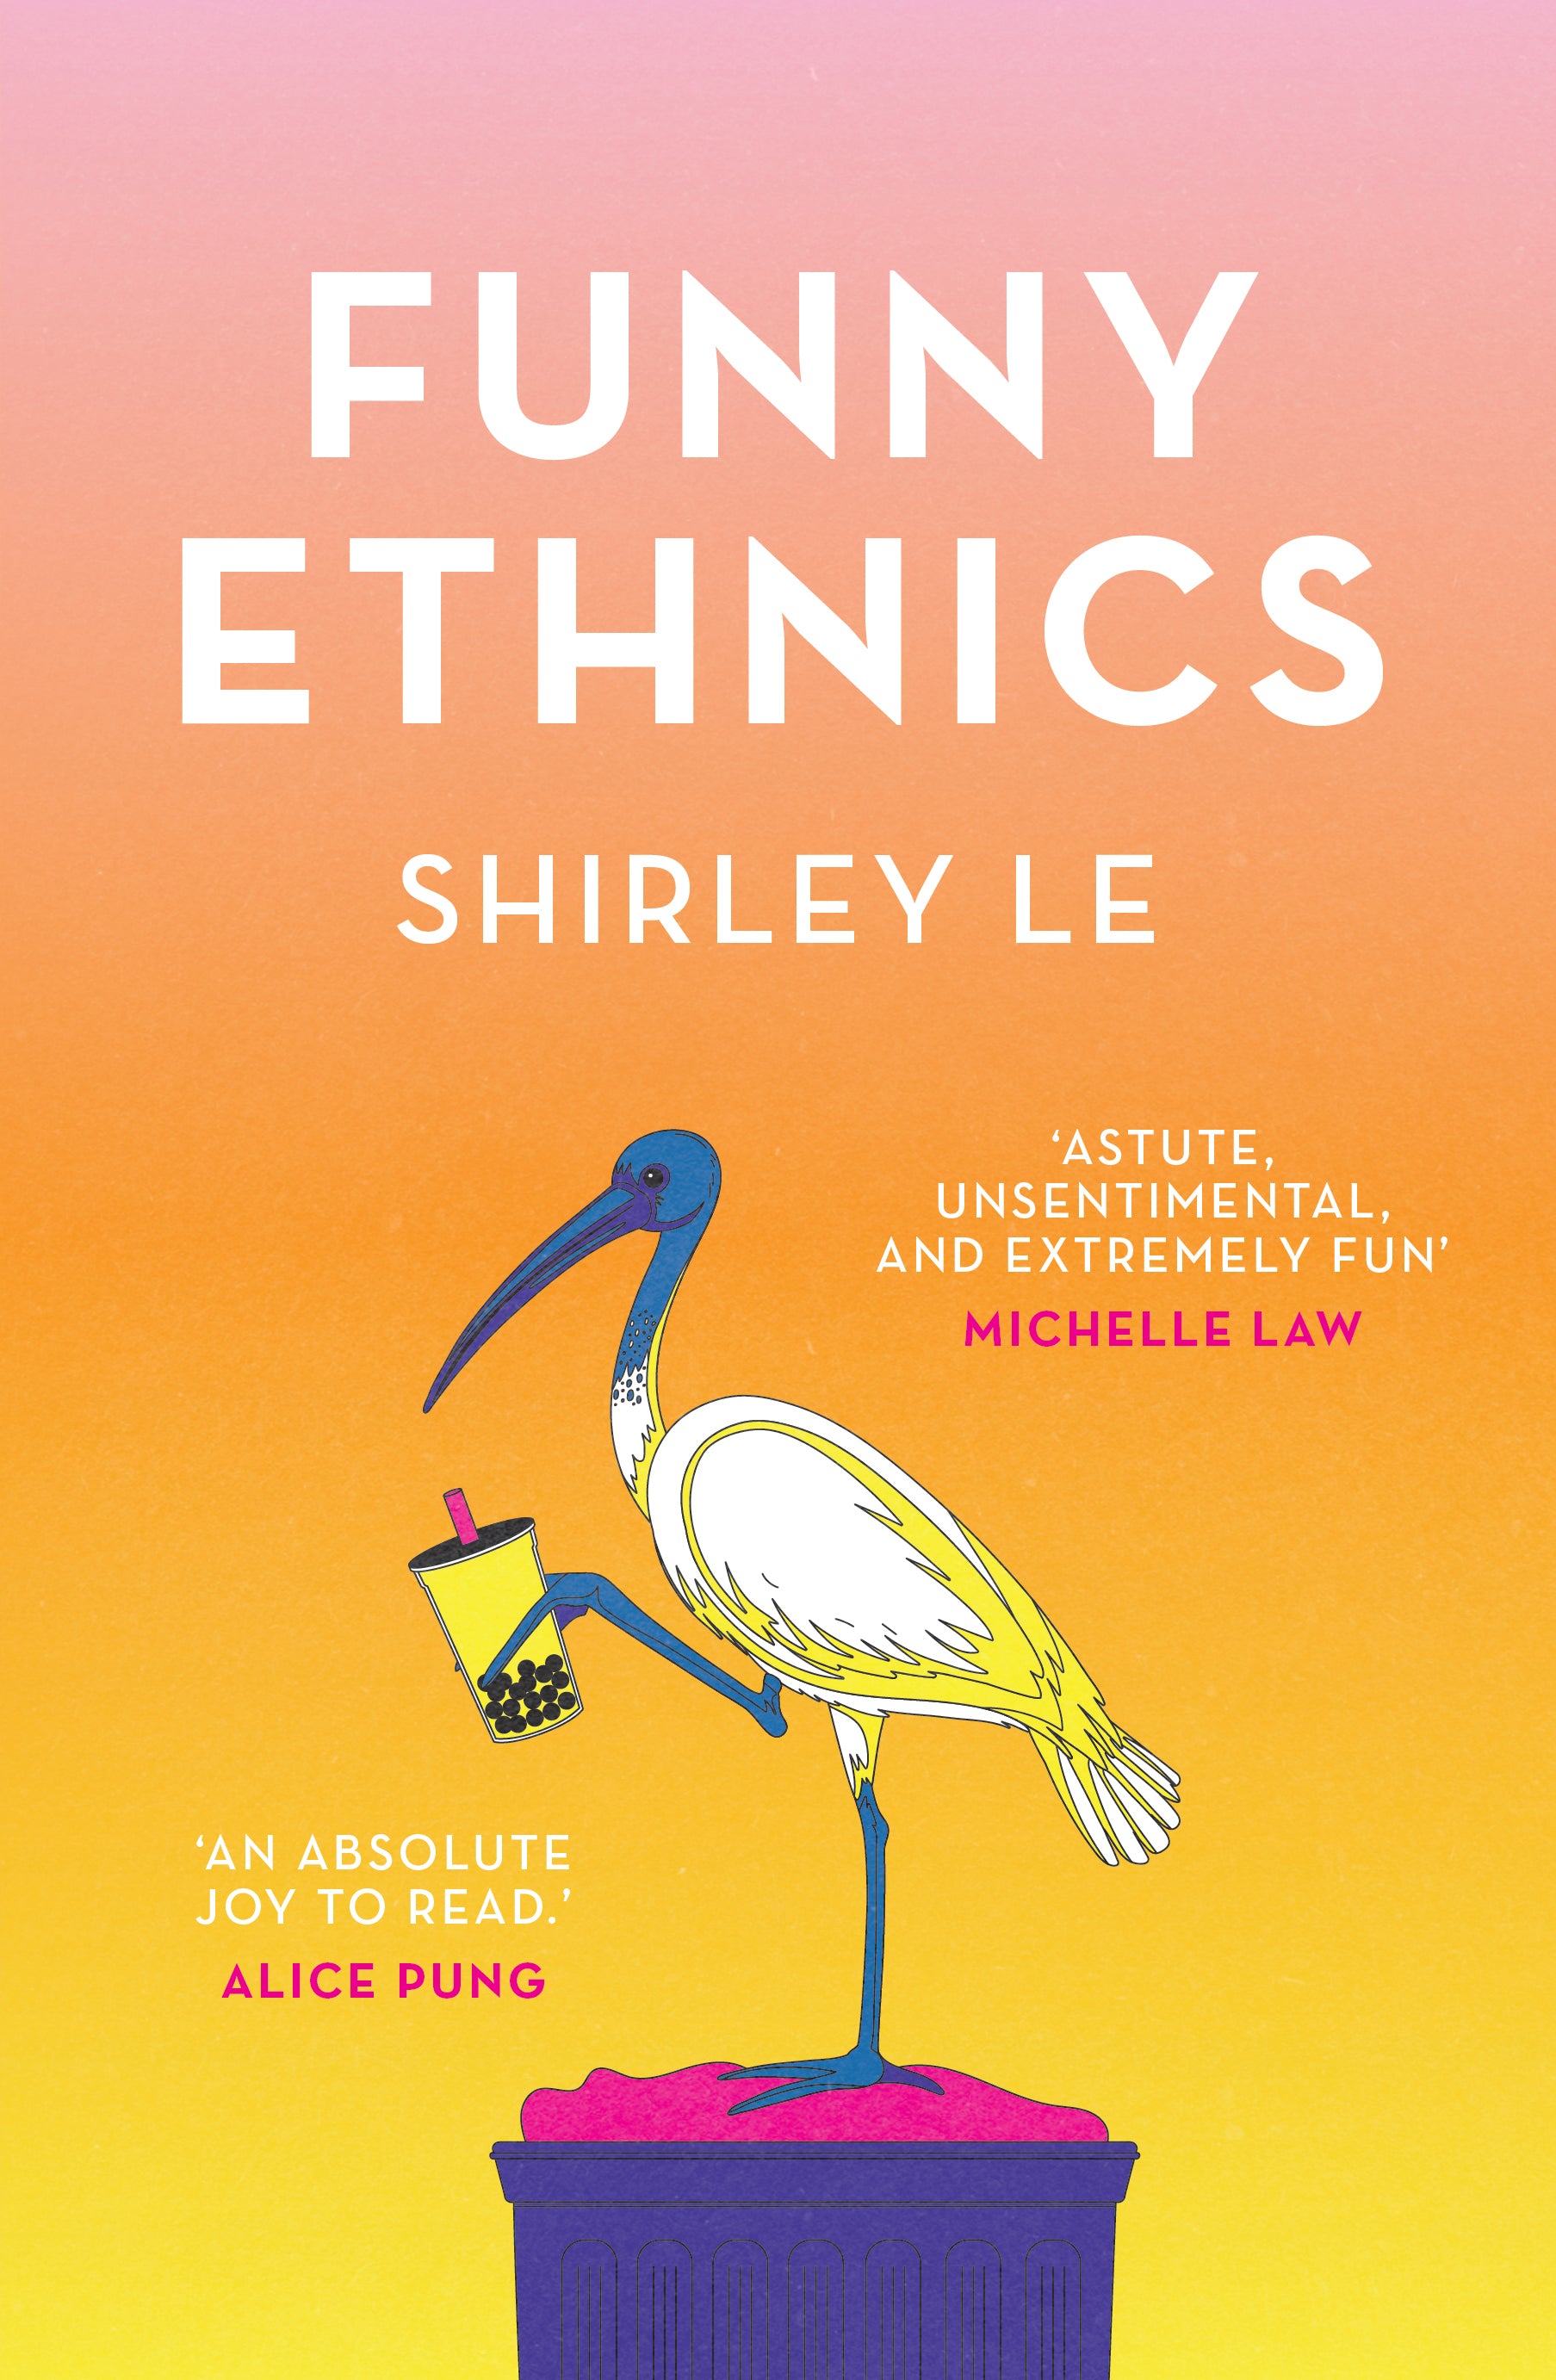 Funny Ethnics by Shirley Le